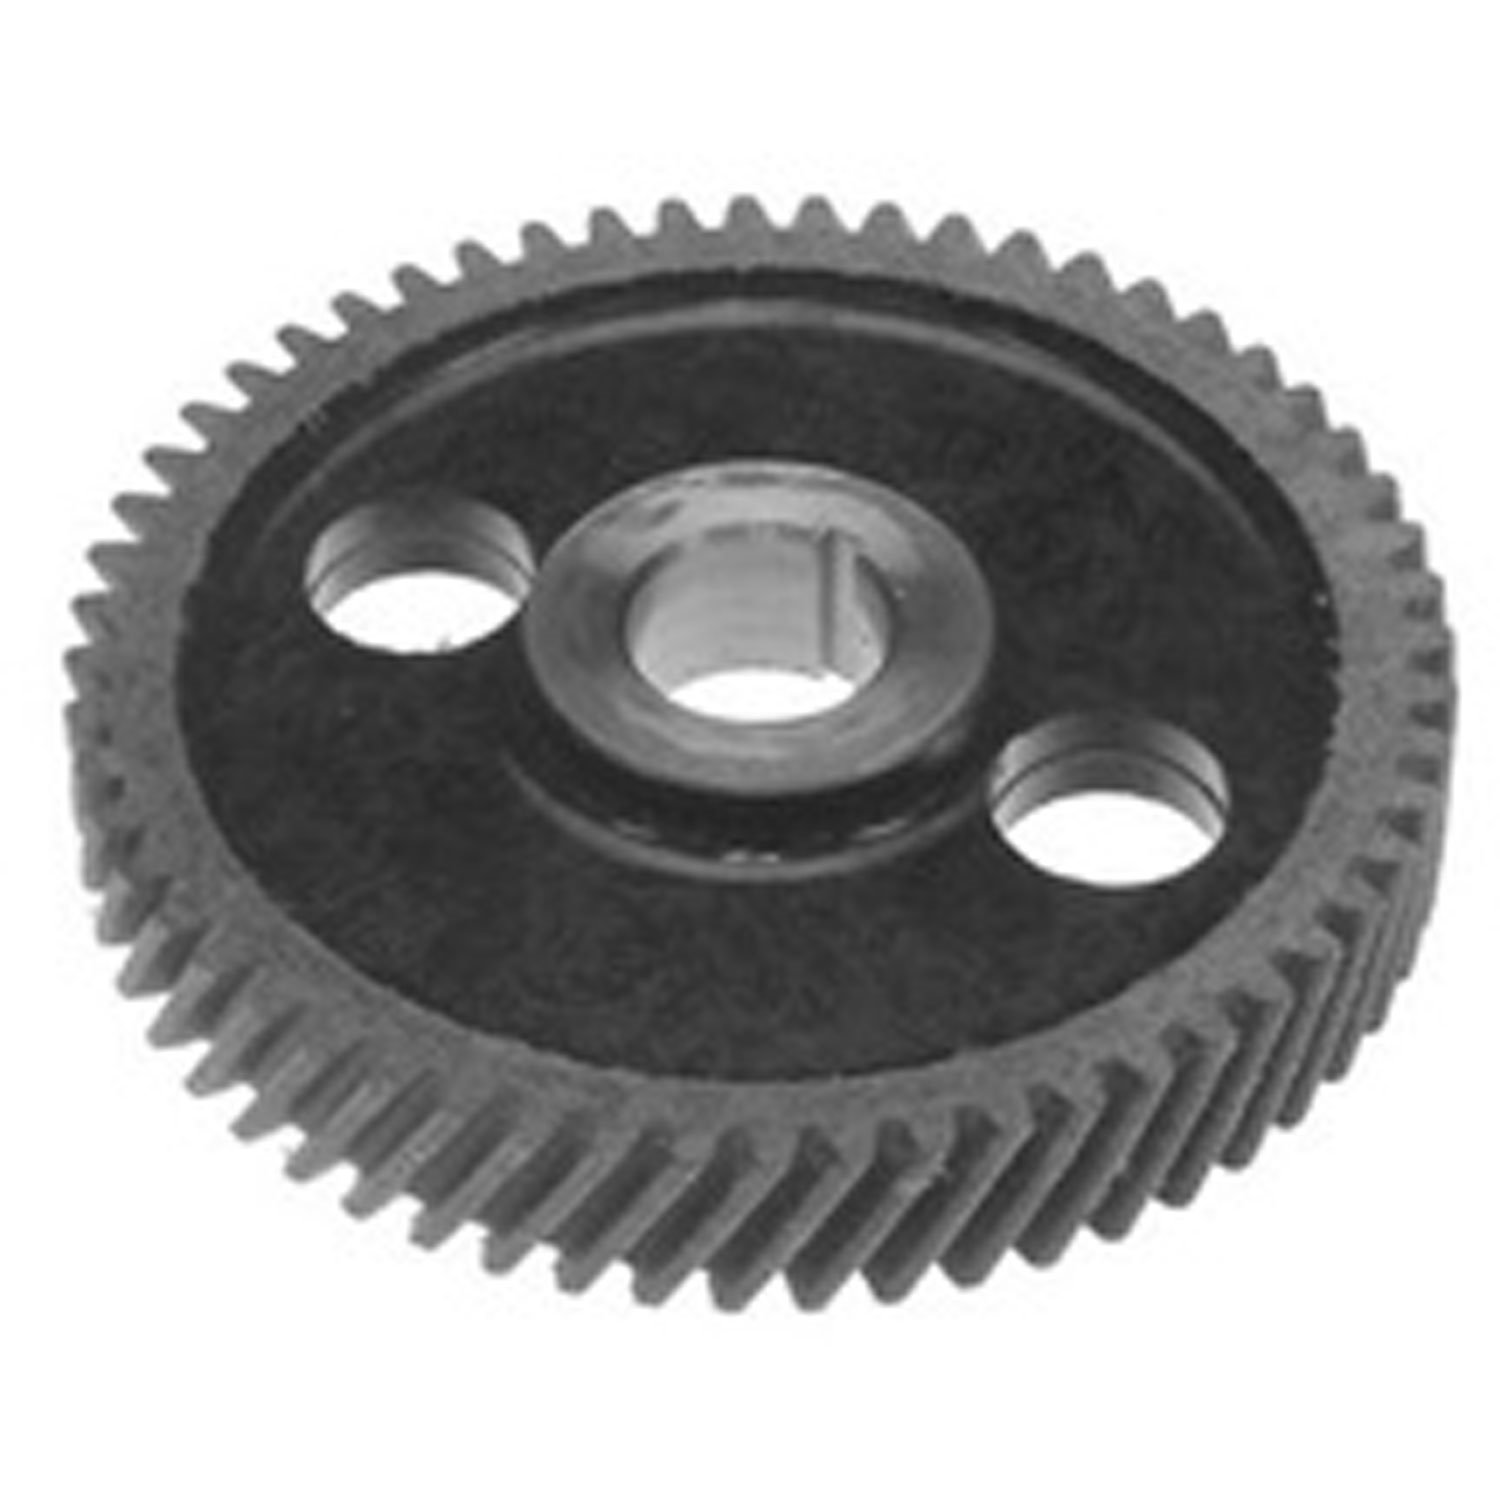 Camshaft Gear 134 CI Without Chain 1946-1971 Willys and Jeep Models